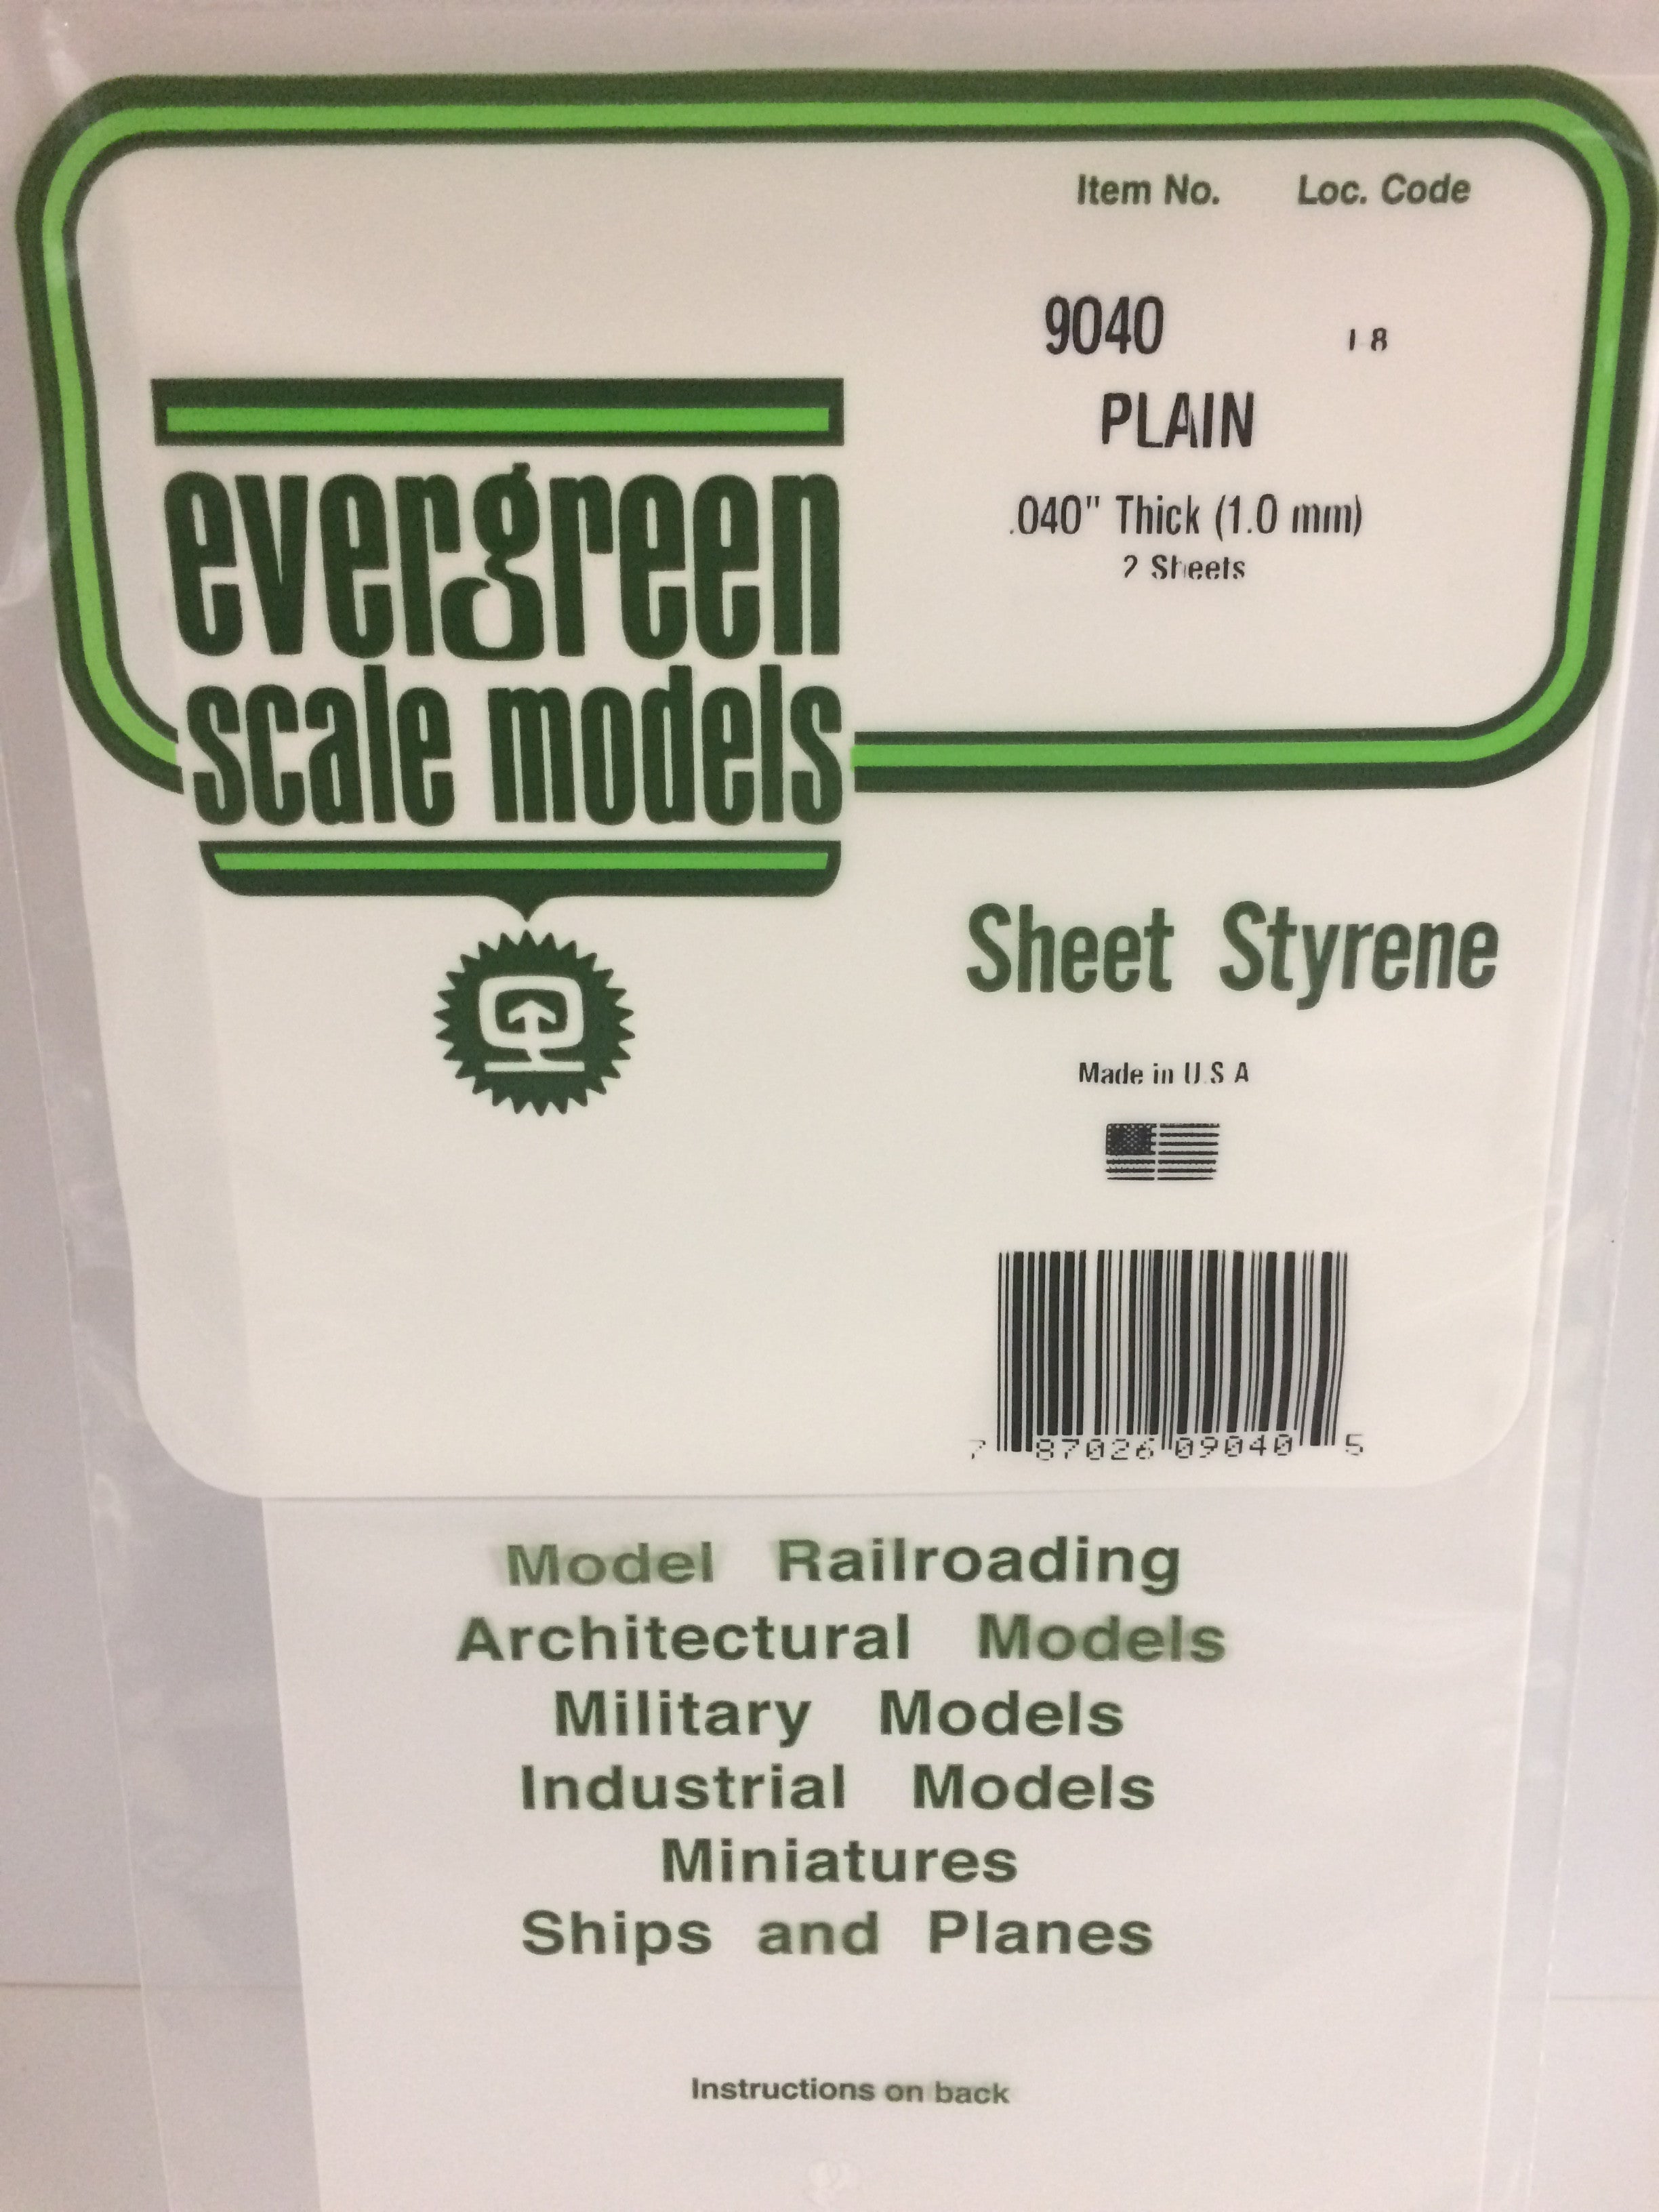 9007 - .015 CLEAR ORIENTED POLYSTYRENE SHEET - Evergreen Scale Models